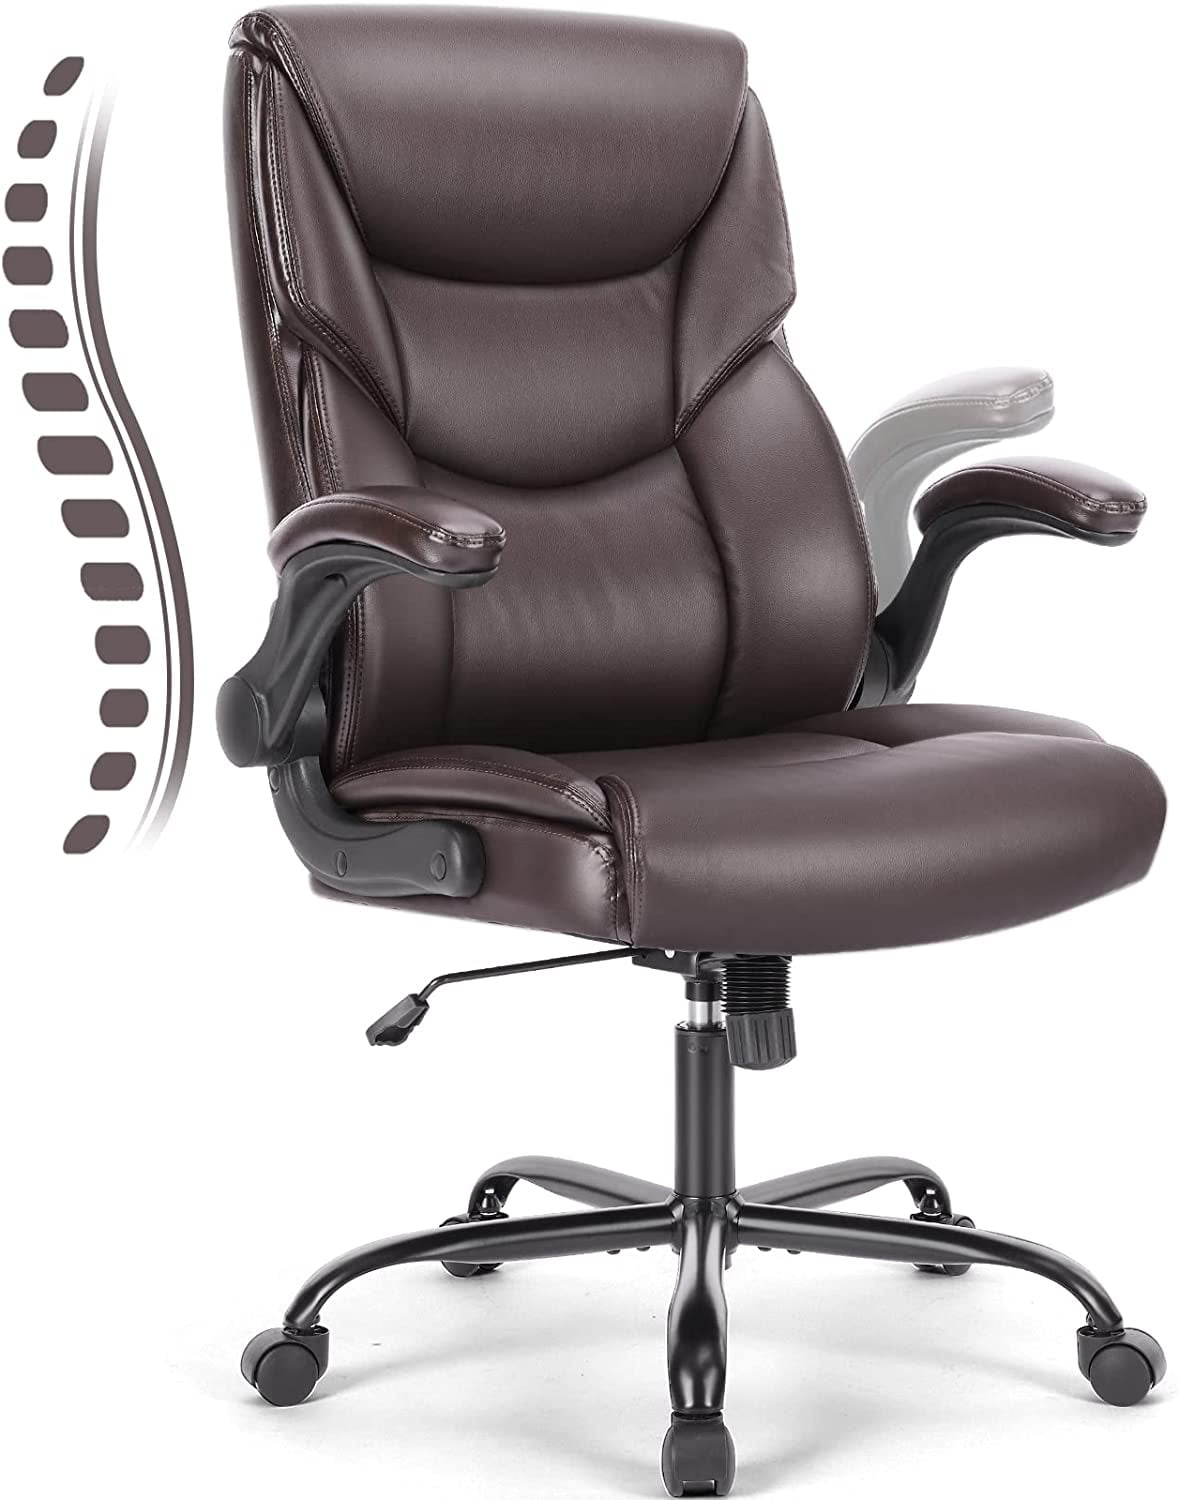 Ergonomic Mesh Mid Back Office Chair with Lumbar Support - Black – US Office  Elements